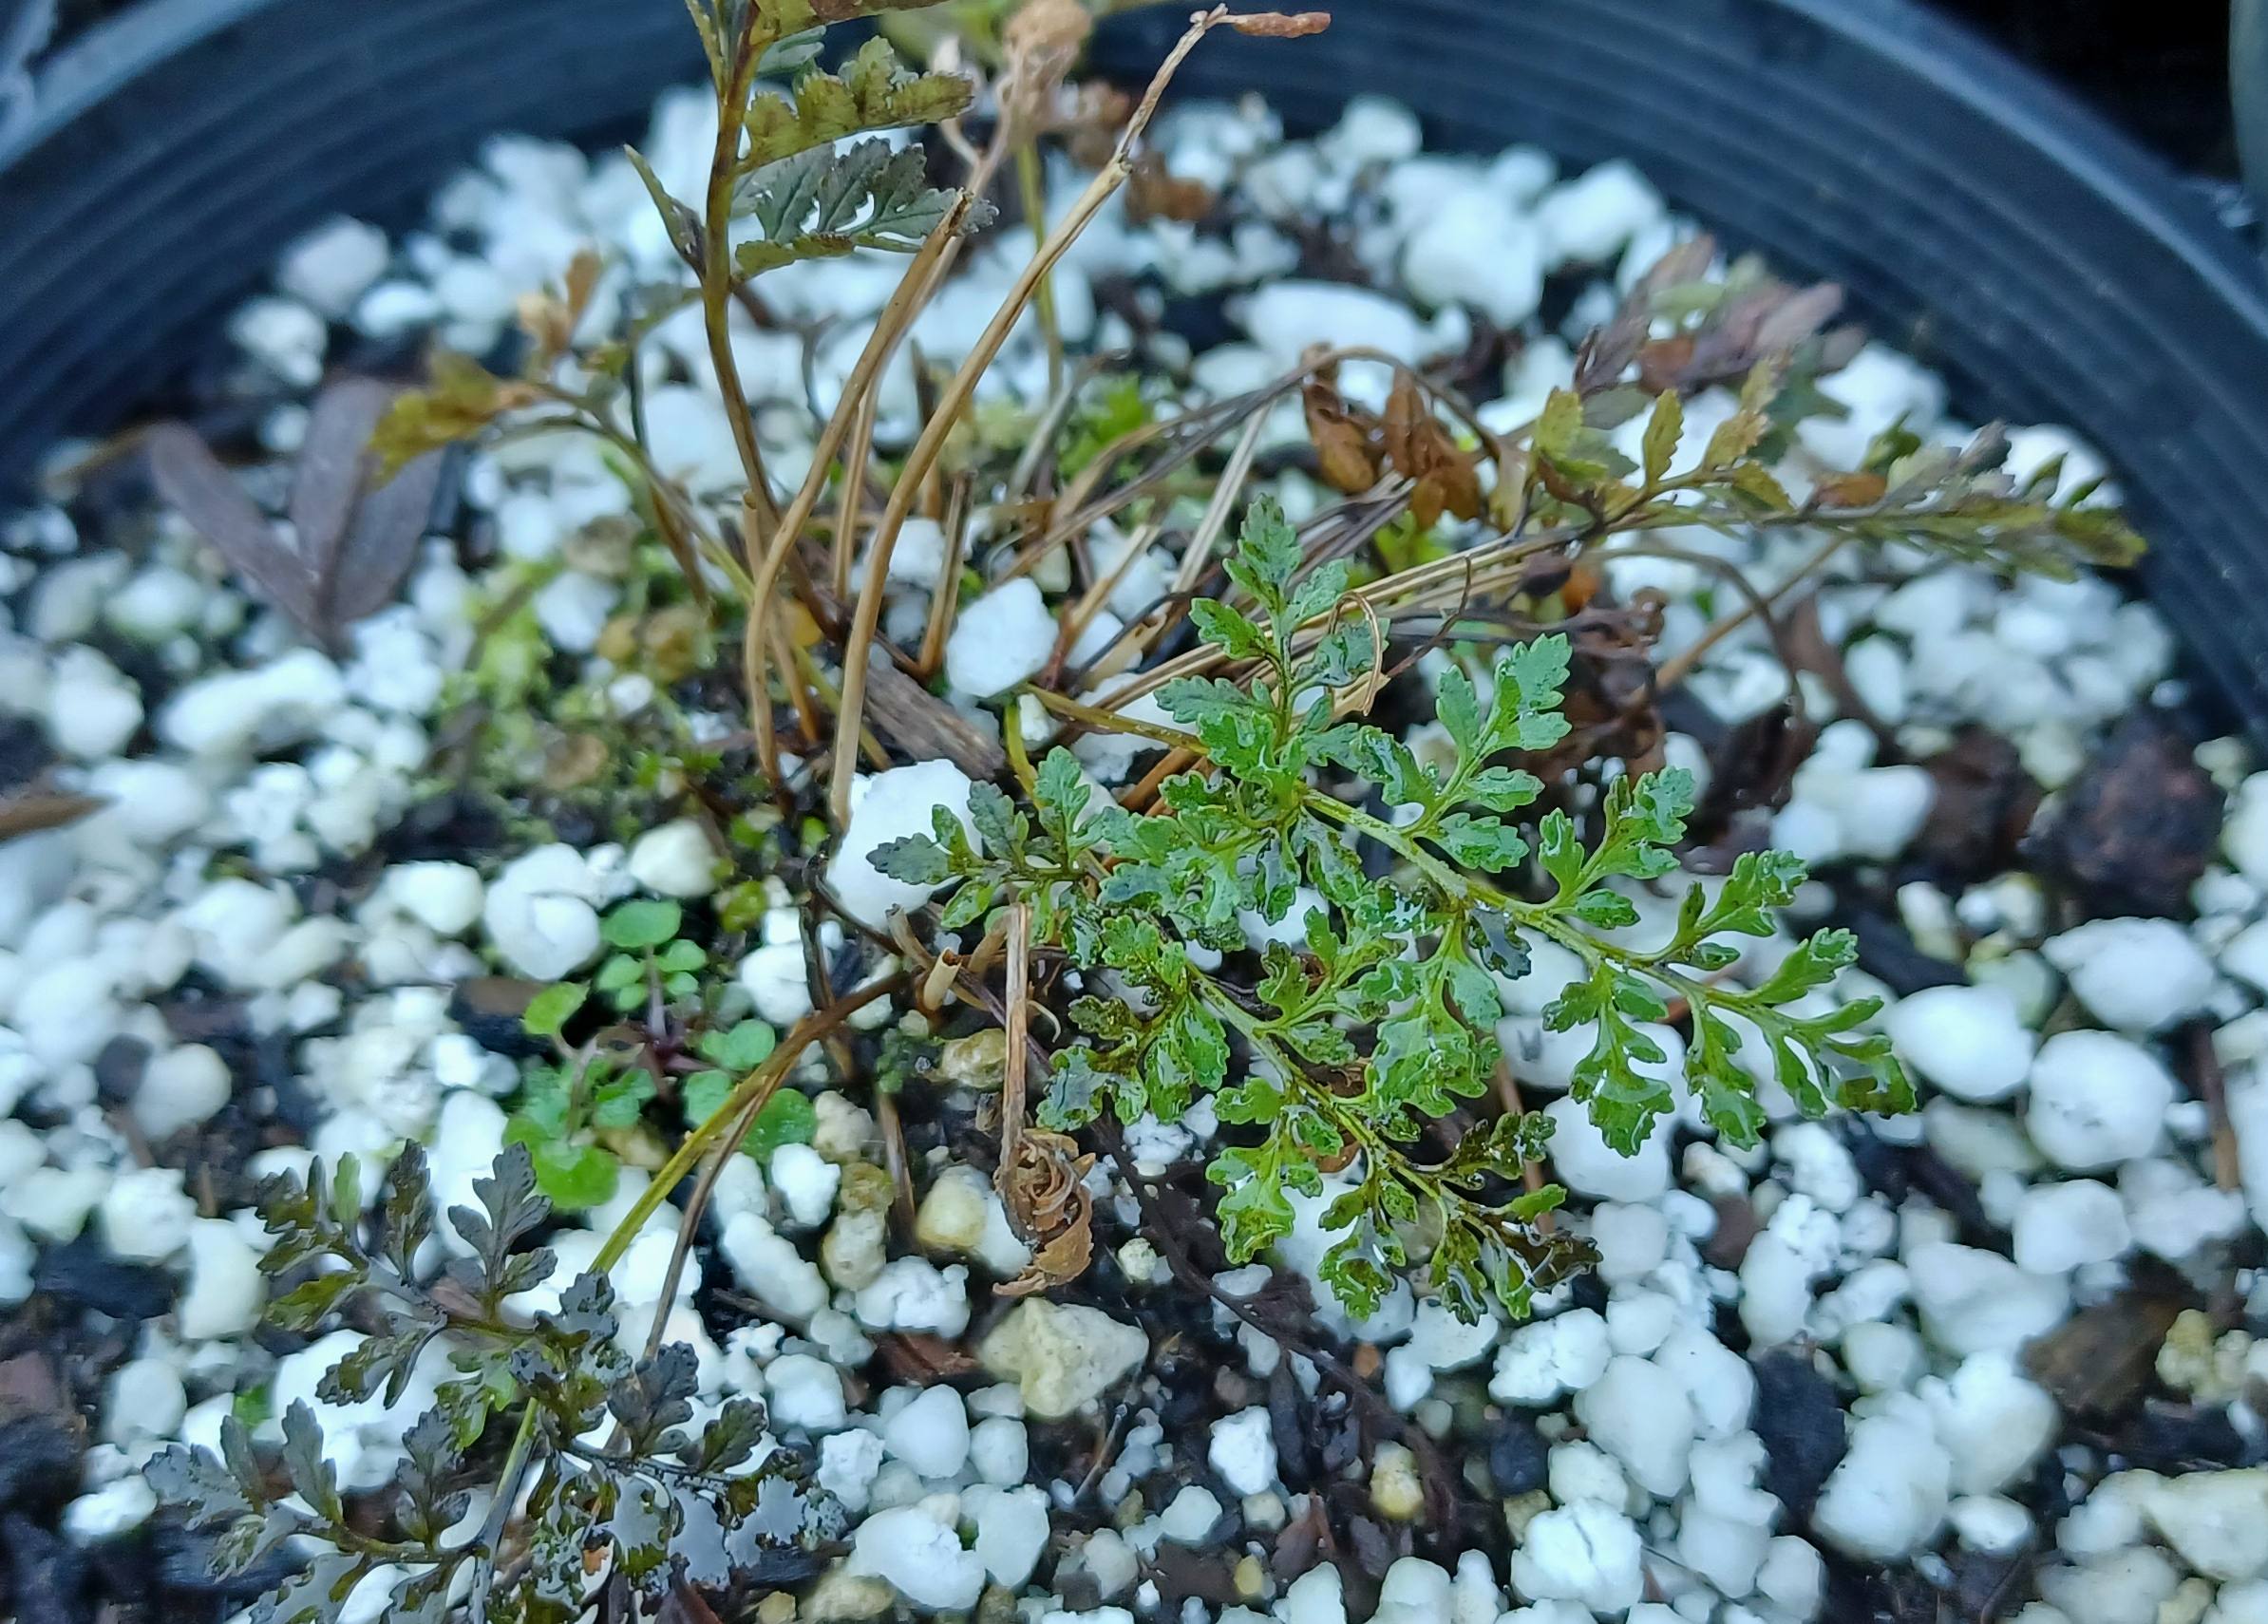 Cryptogramma acrostichoides growing in 1-gallon containers at a native plant nursery near Portland, Oregon.